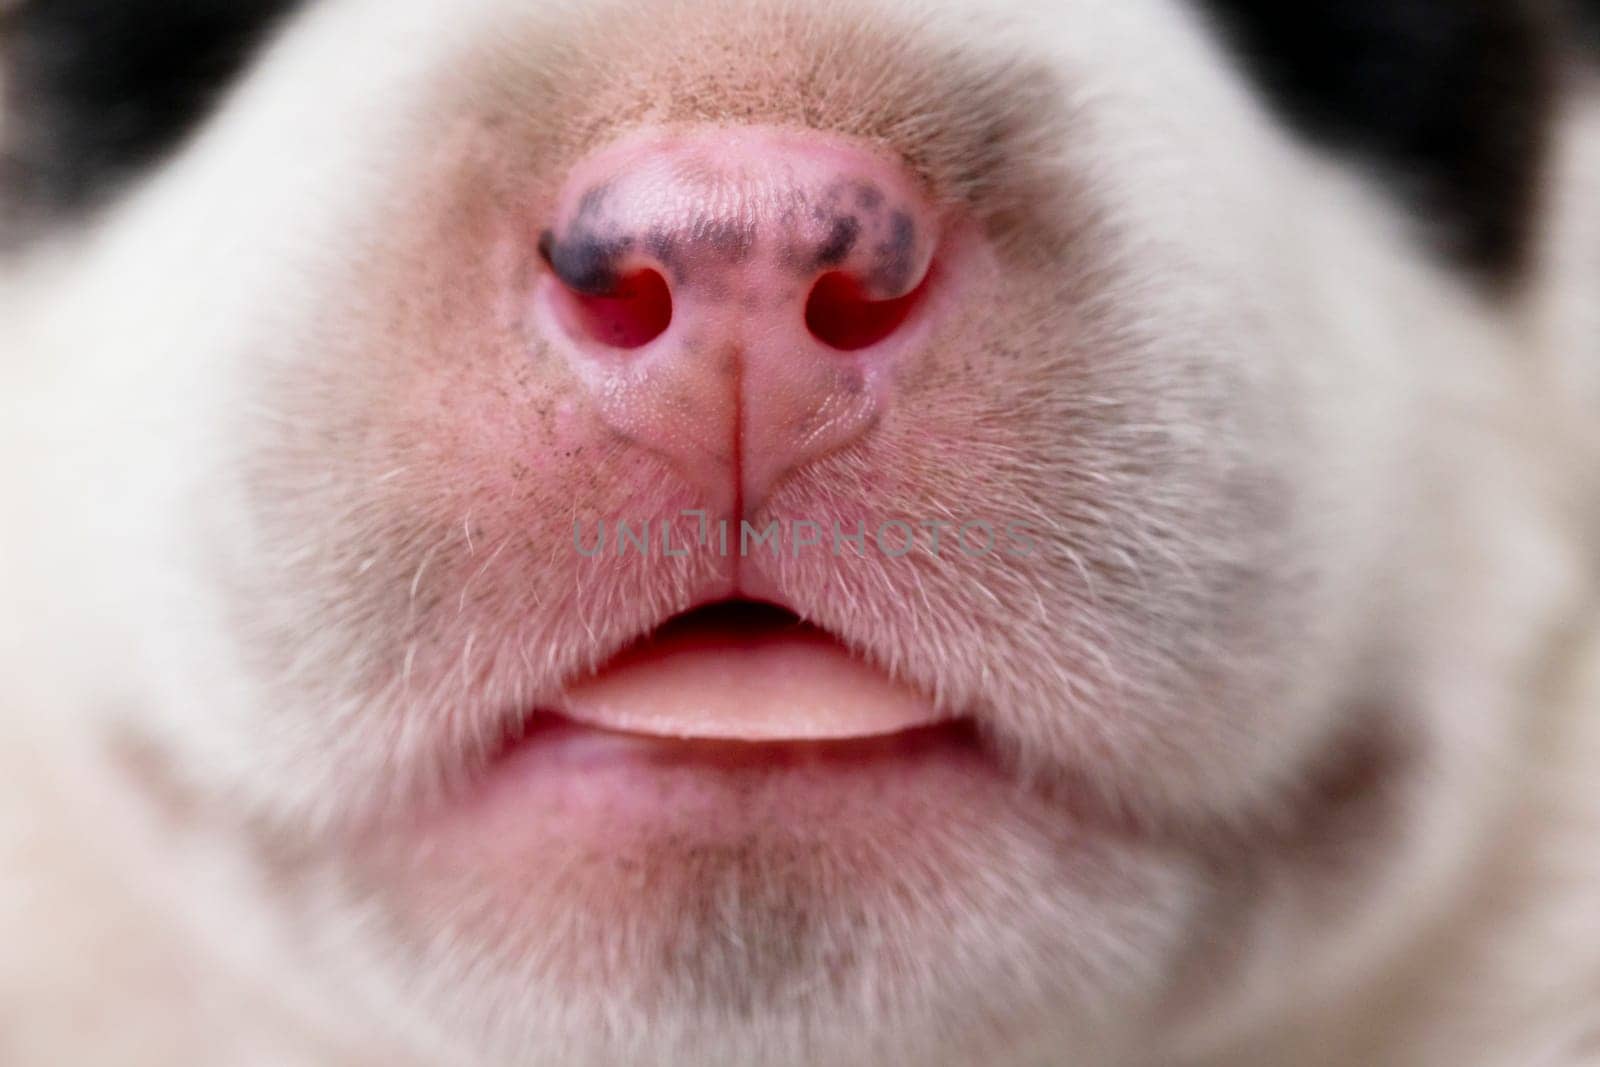 Close-up view of a dog's snout and open mouth. Macro shot with focus on details.